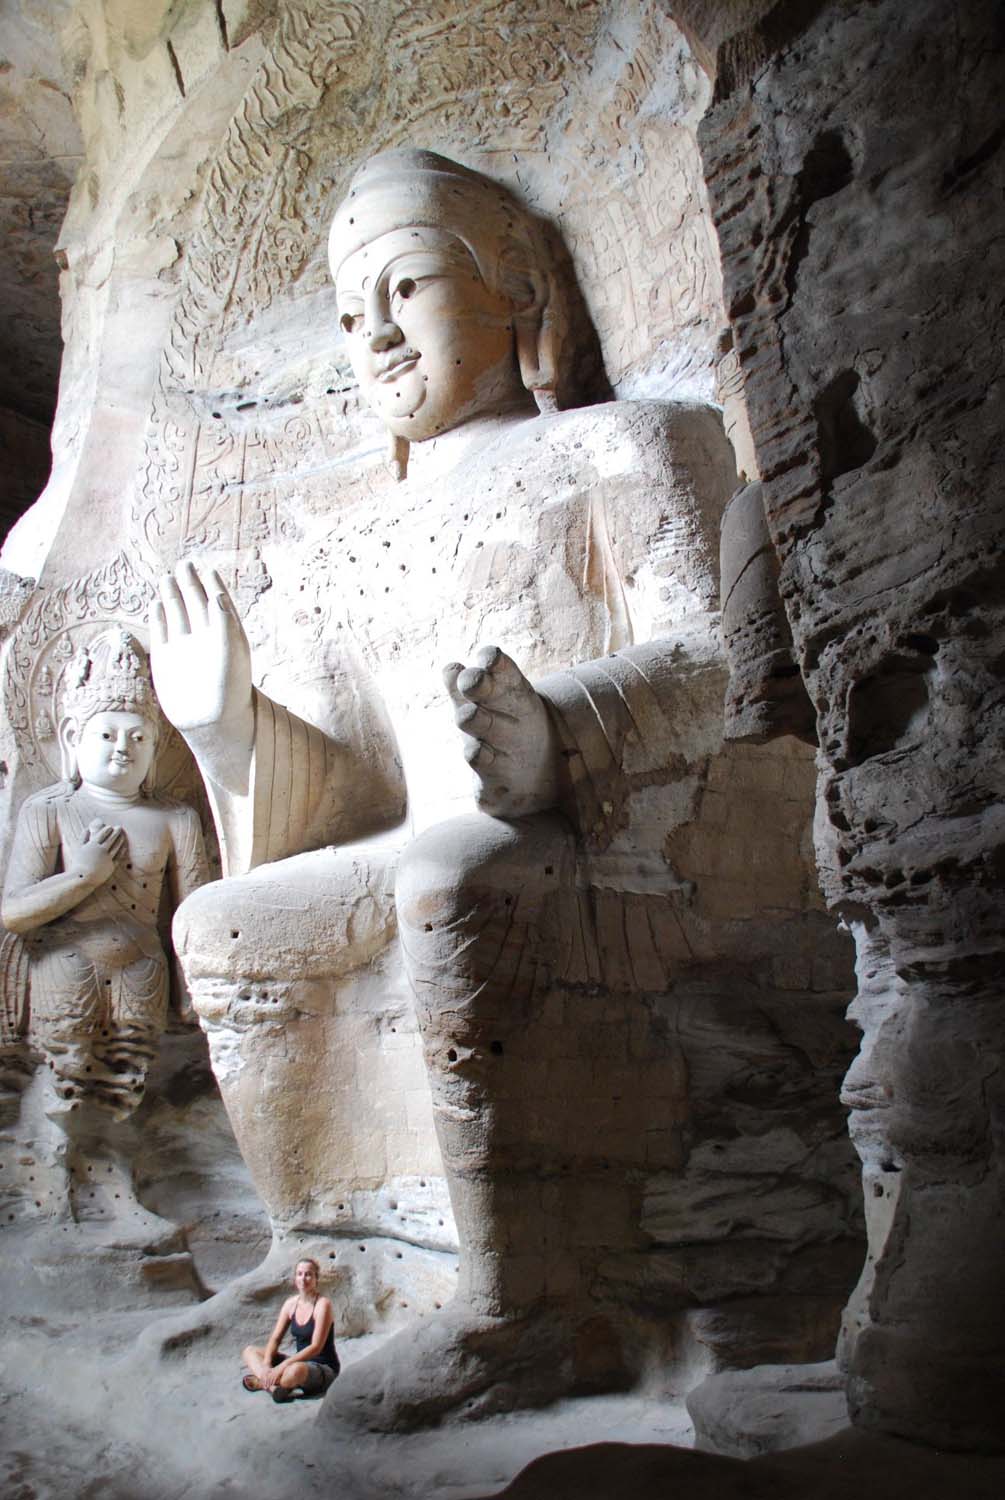 these ones were carved inside a cave, beautiful